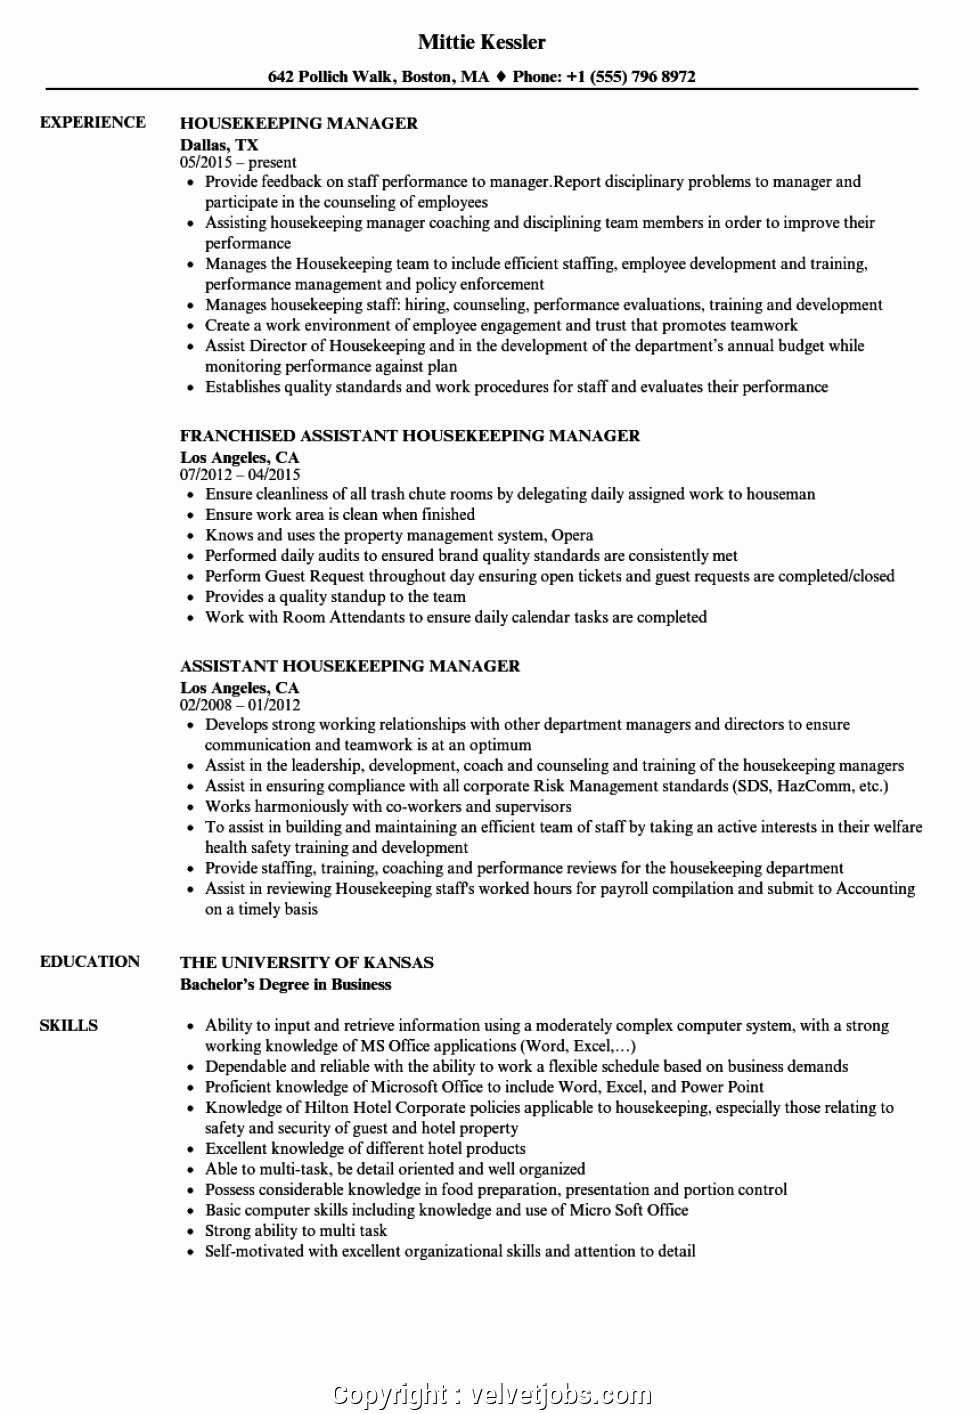 Housekeeping Supervisors Duties and Responsibilities Elegant Downloadable Housekeeping Operations Manager Resume